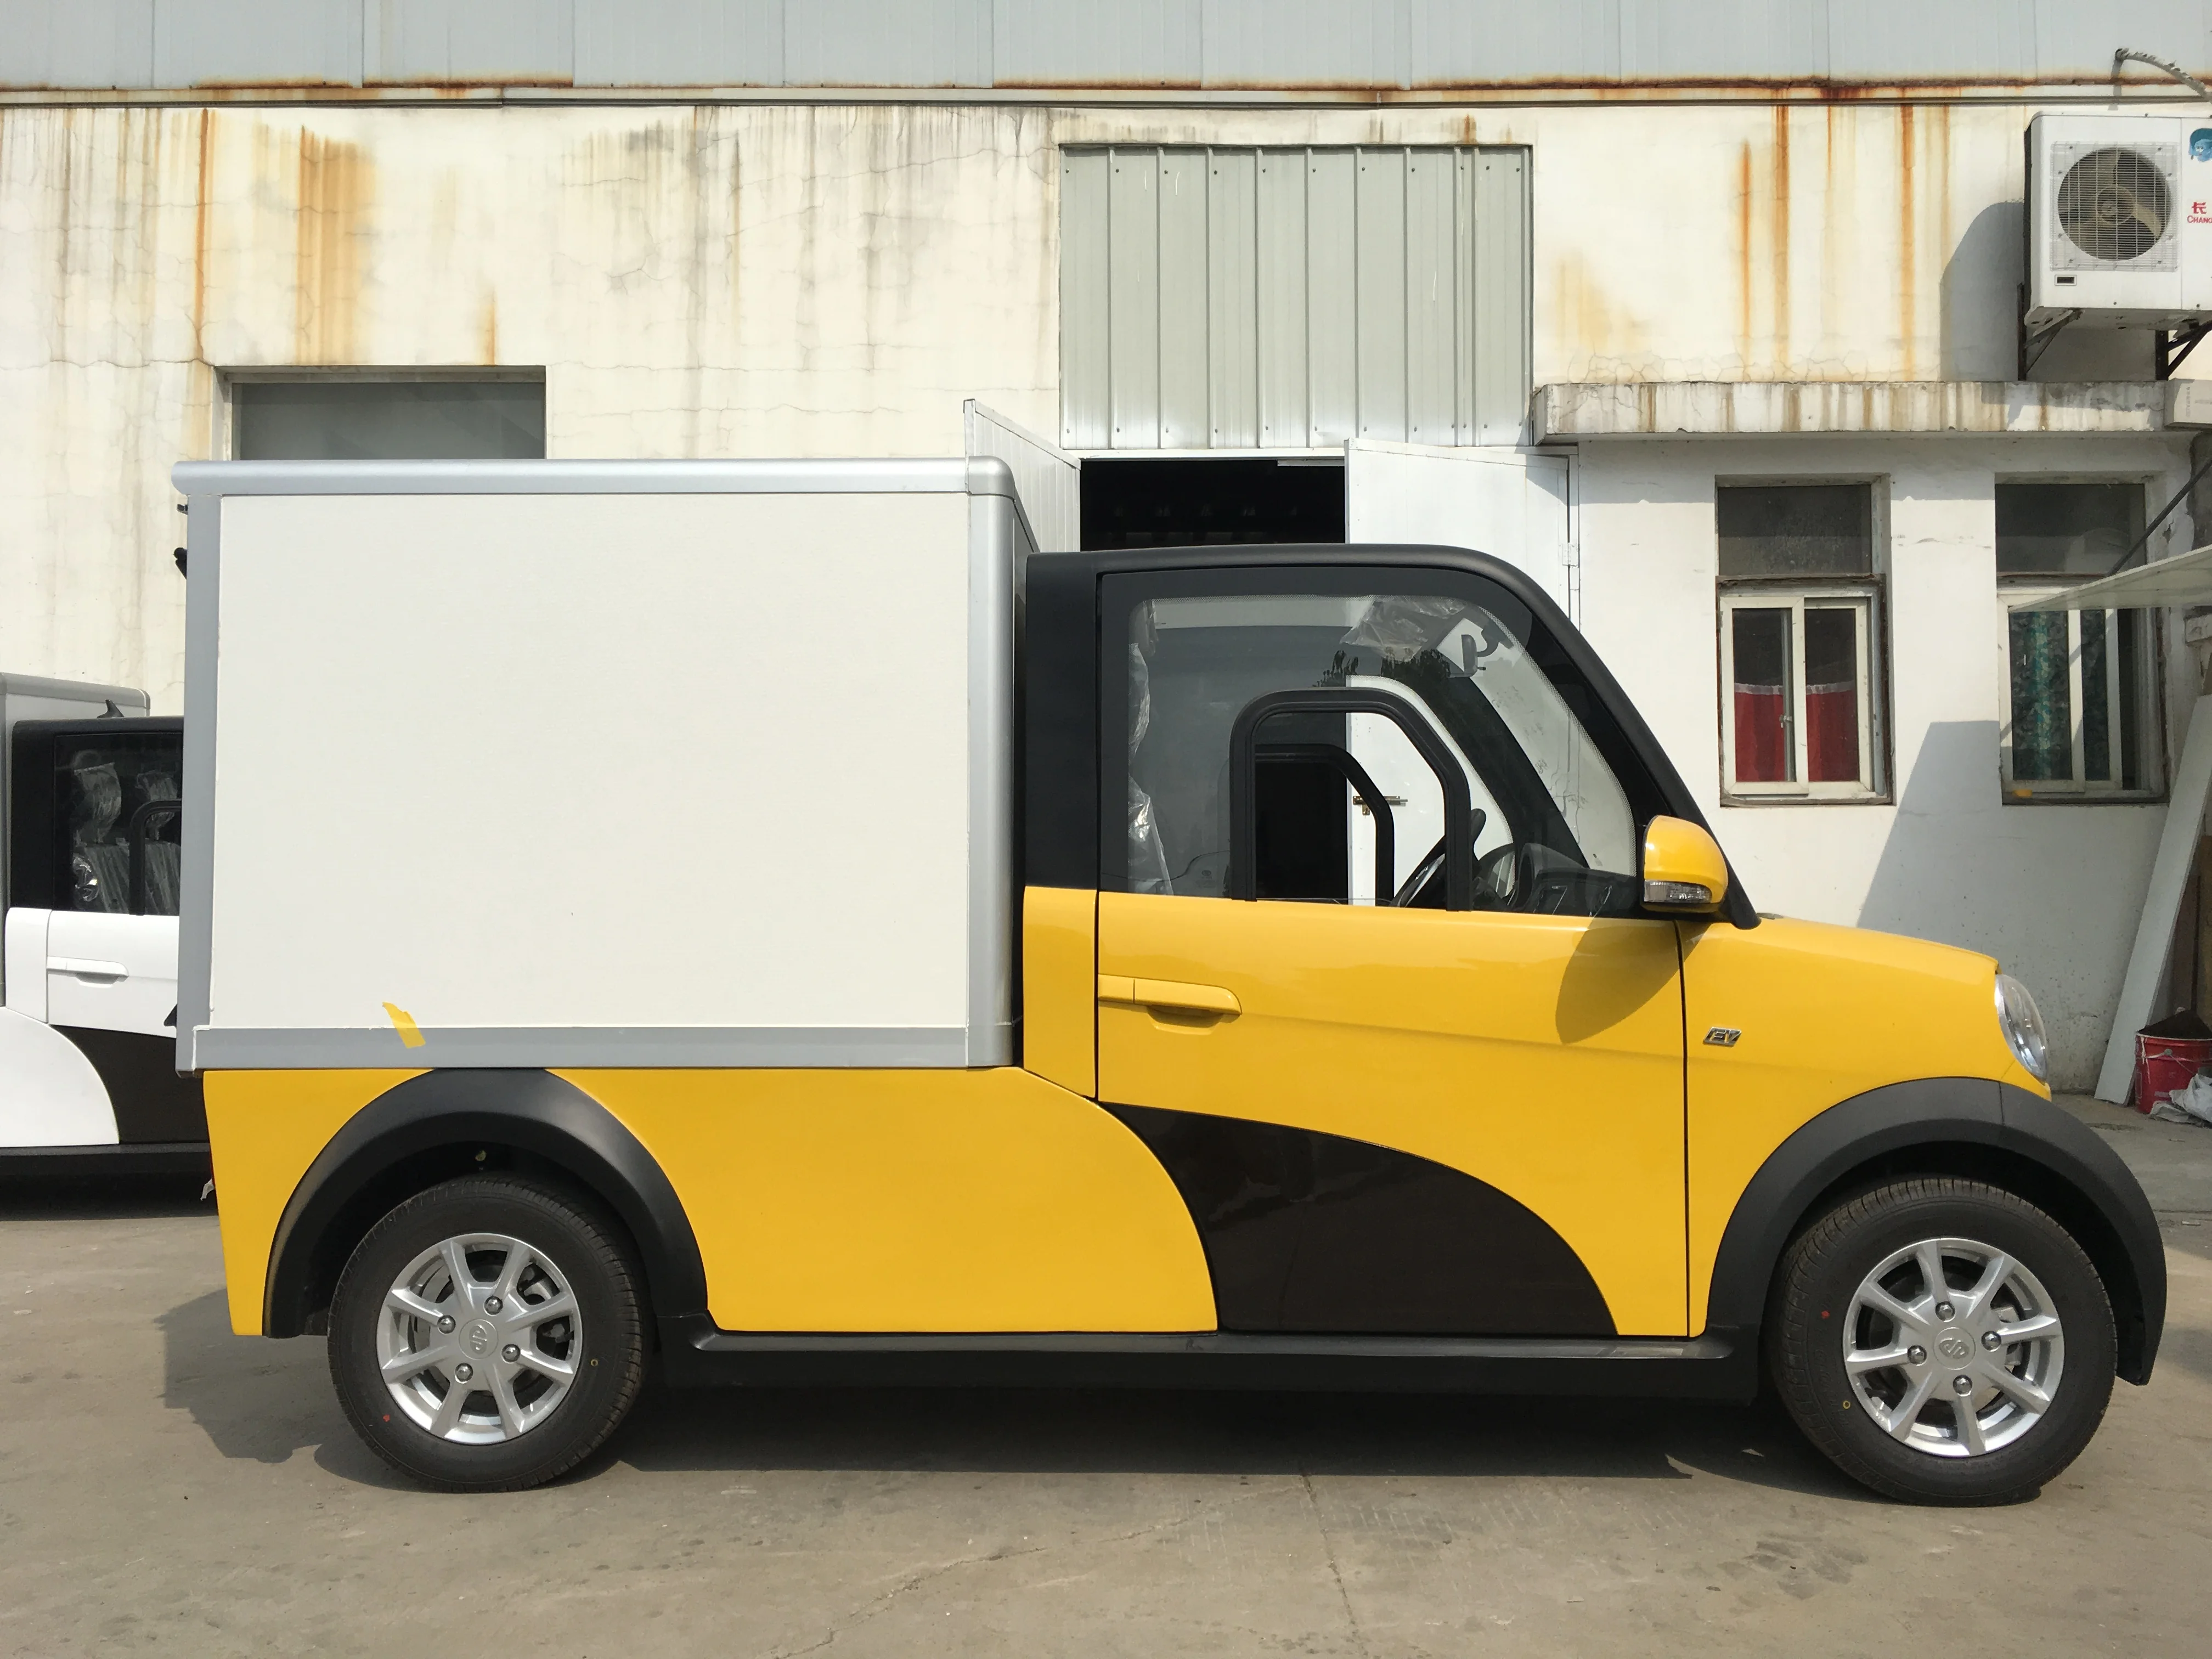 2020 Eec 80km/h Electric Vehicle Delivery Car With Van Buy Electric